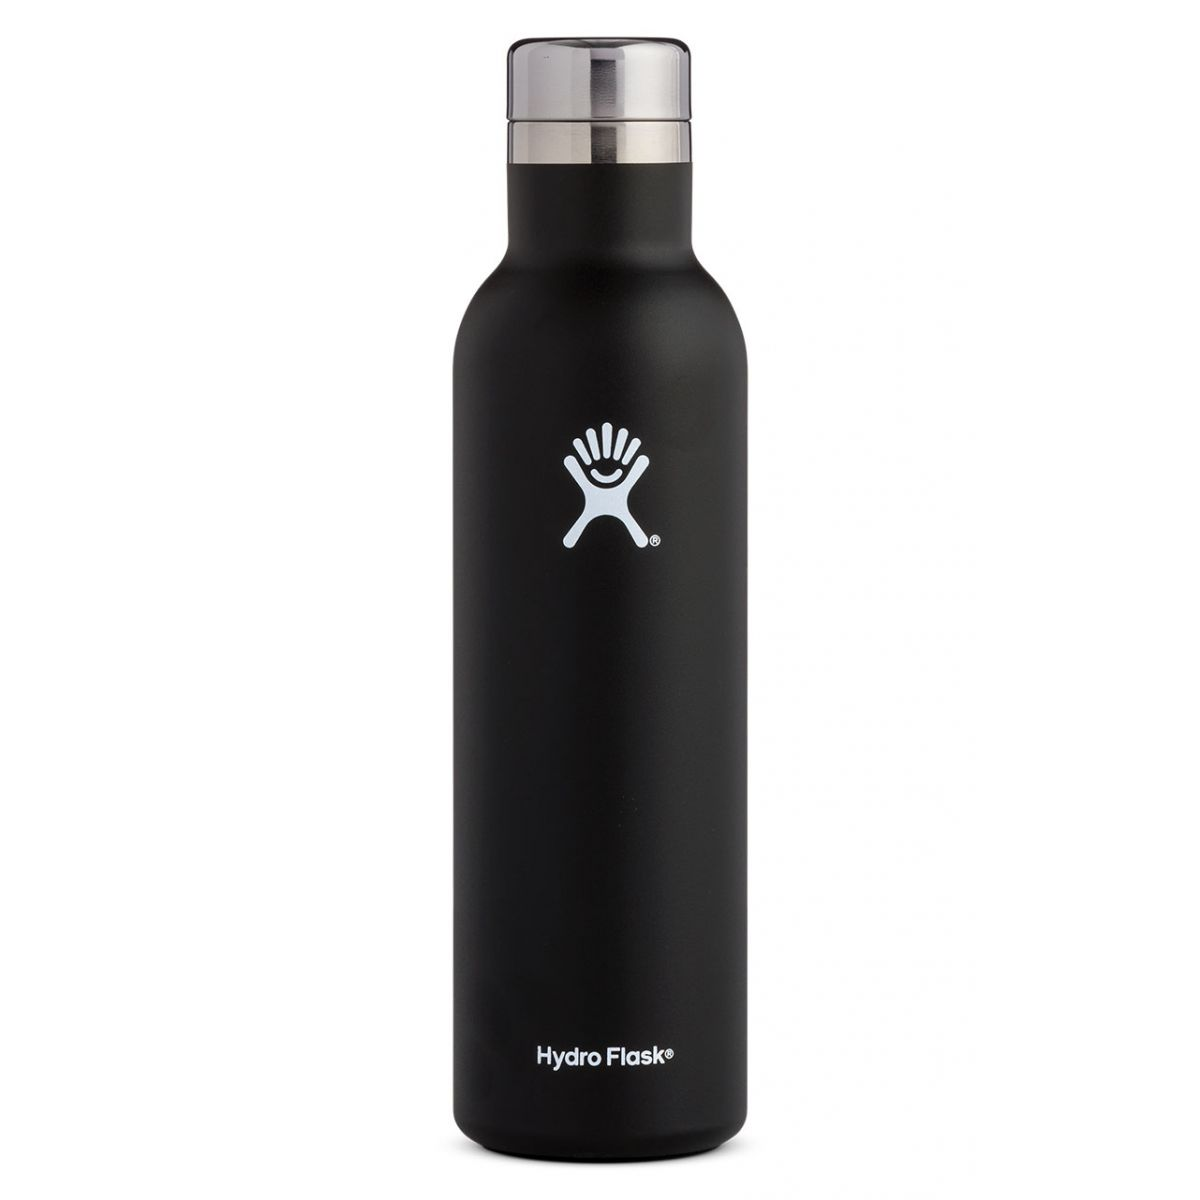 Hydro Flask Outdoor Kitchen Collection has everything you need for picnics  outside » Gadget Flow